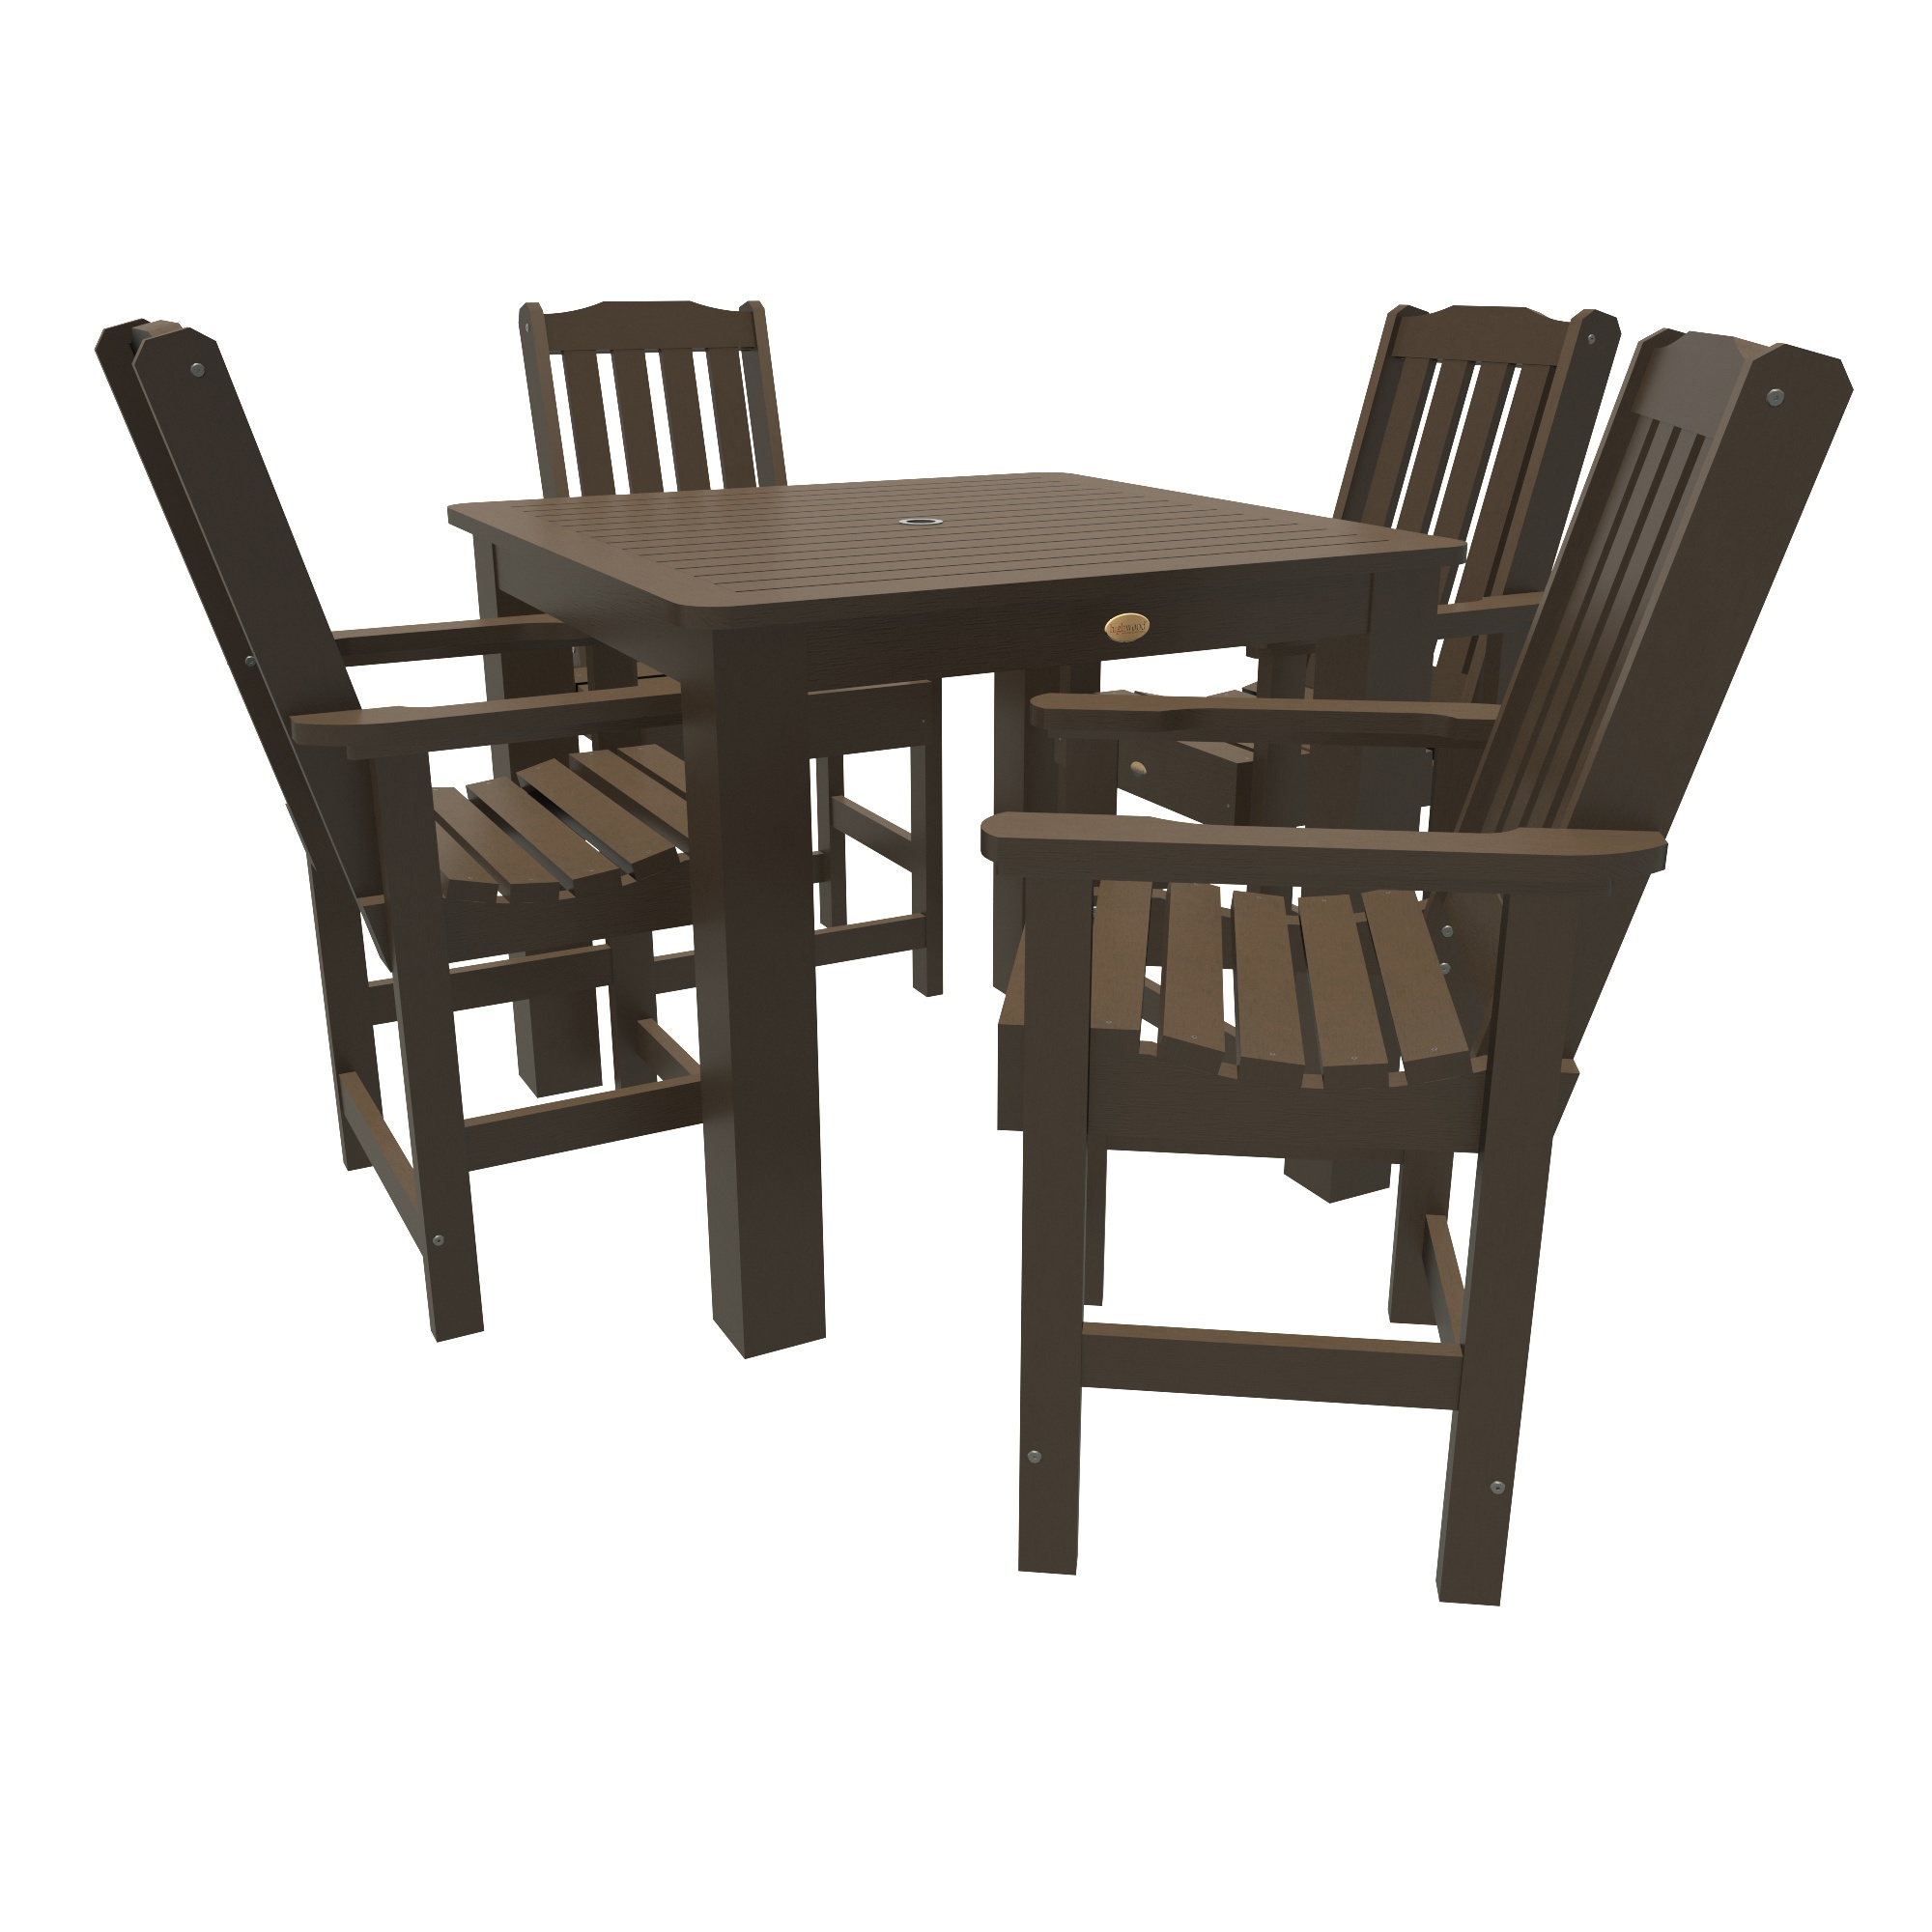 Highwood 5pc Lehigh Square Dining Set - Counter Height - image 1 of 8